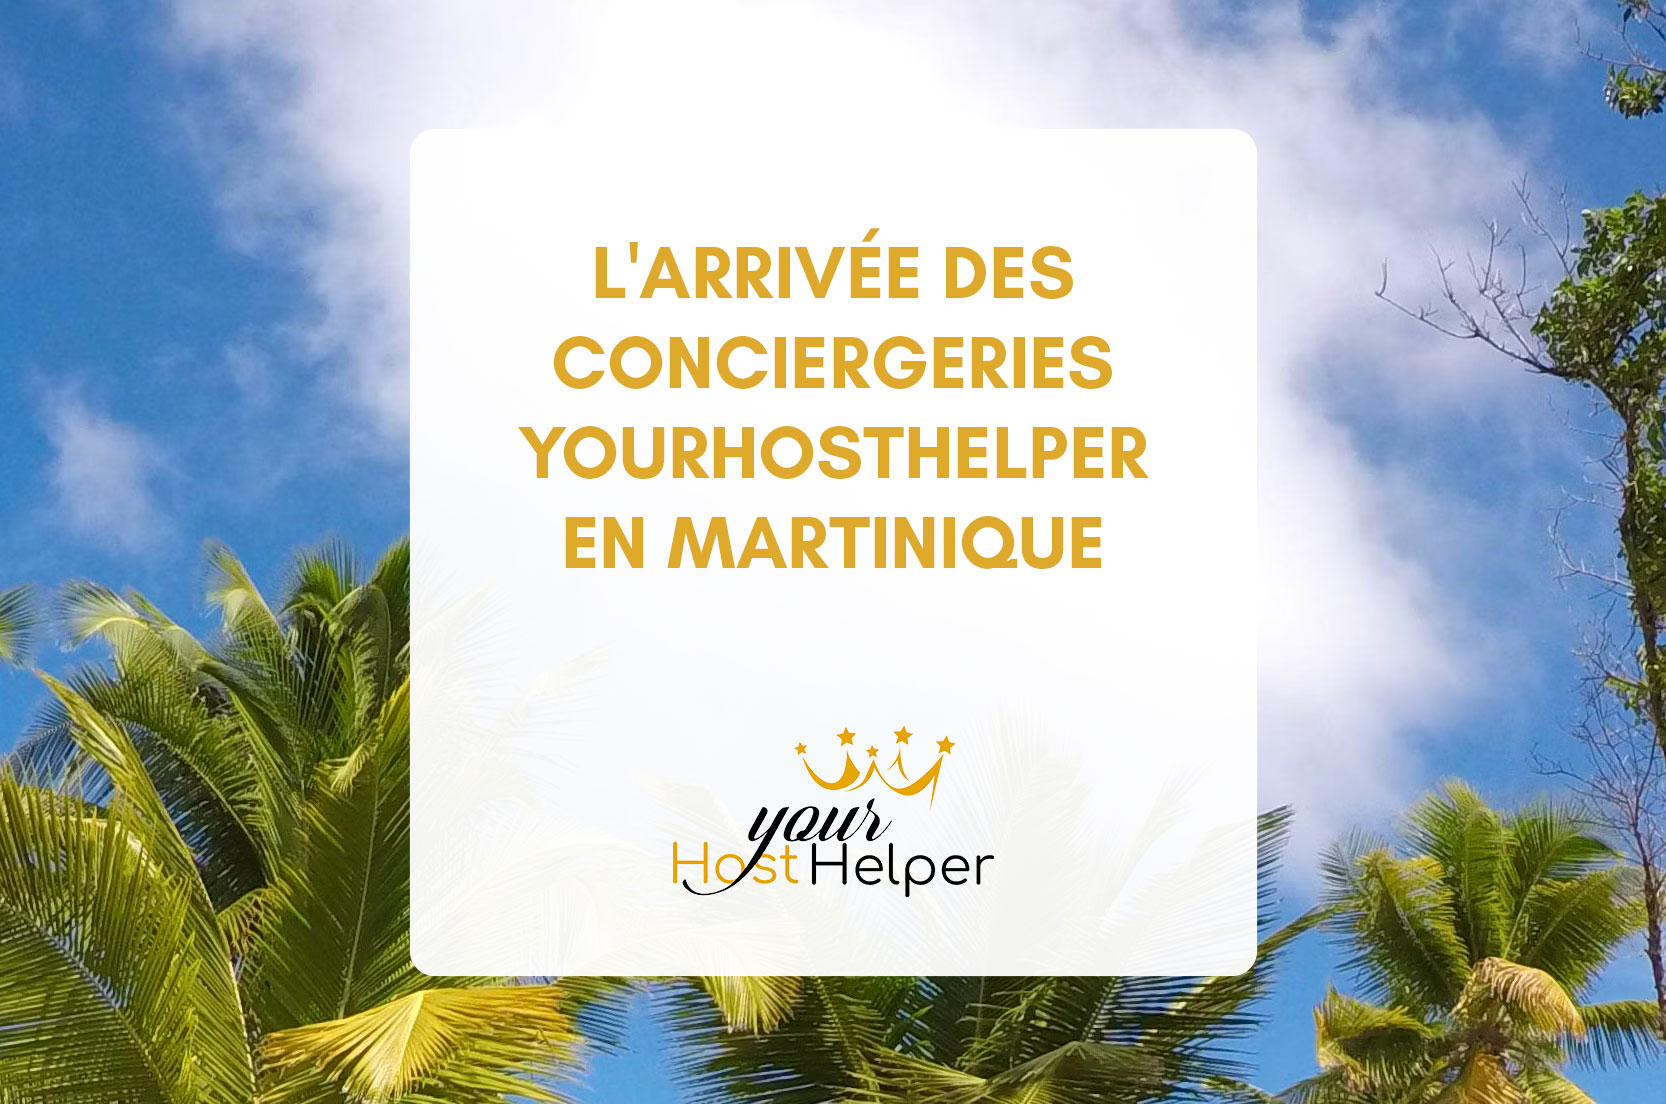 You are currently viewing The arrival of YourHostHelper concierge services in Martinique